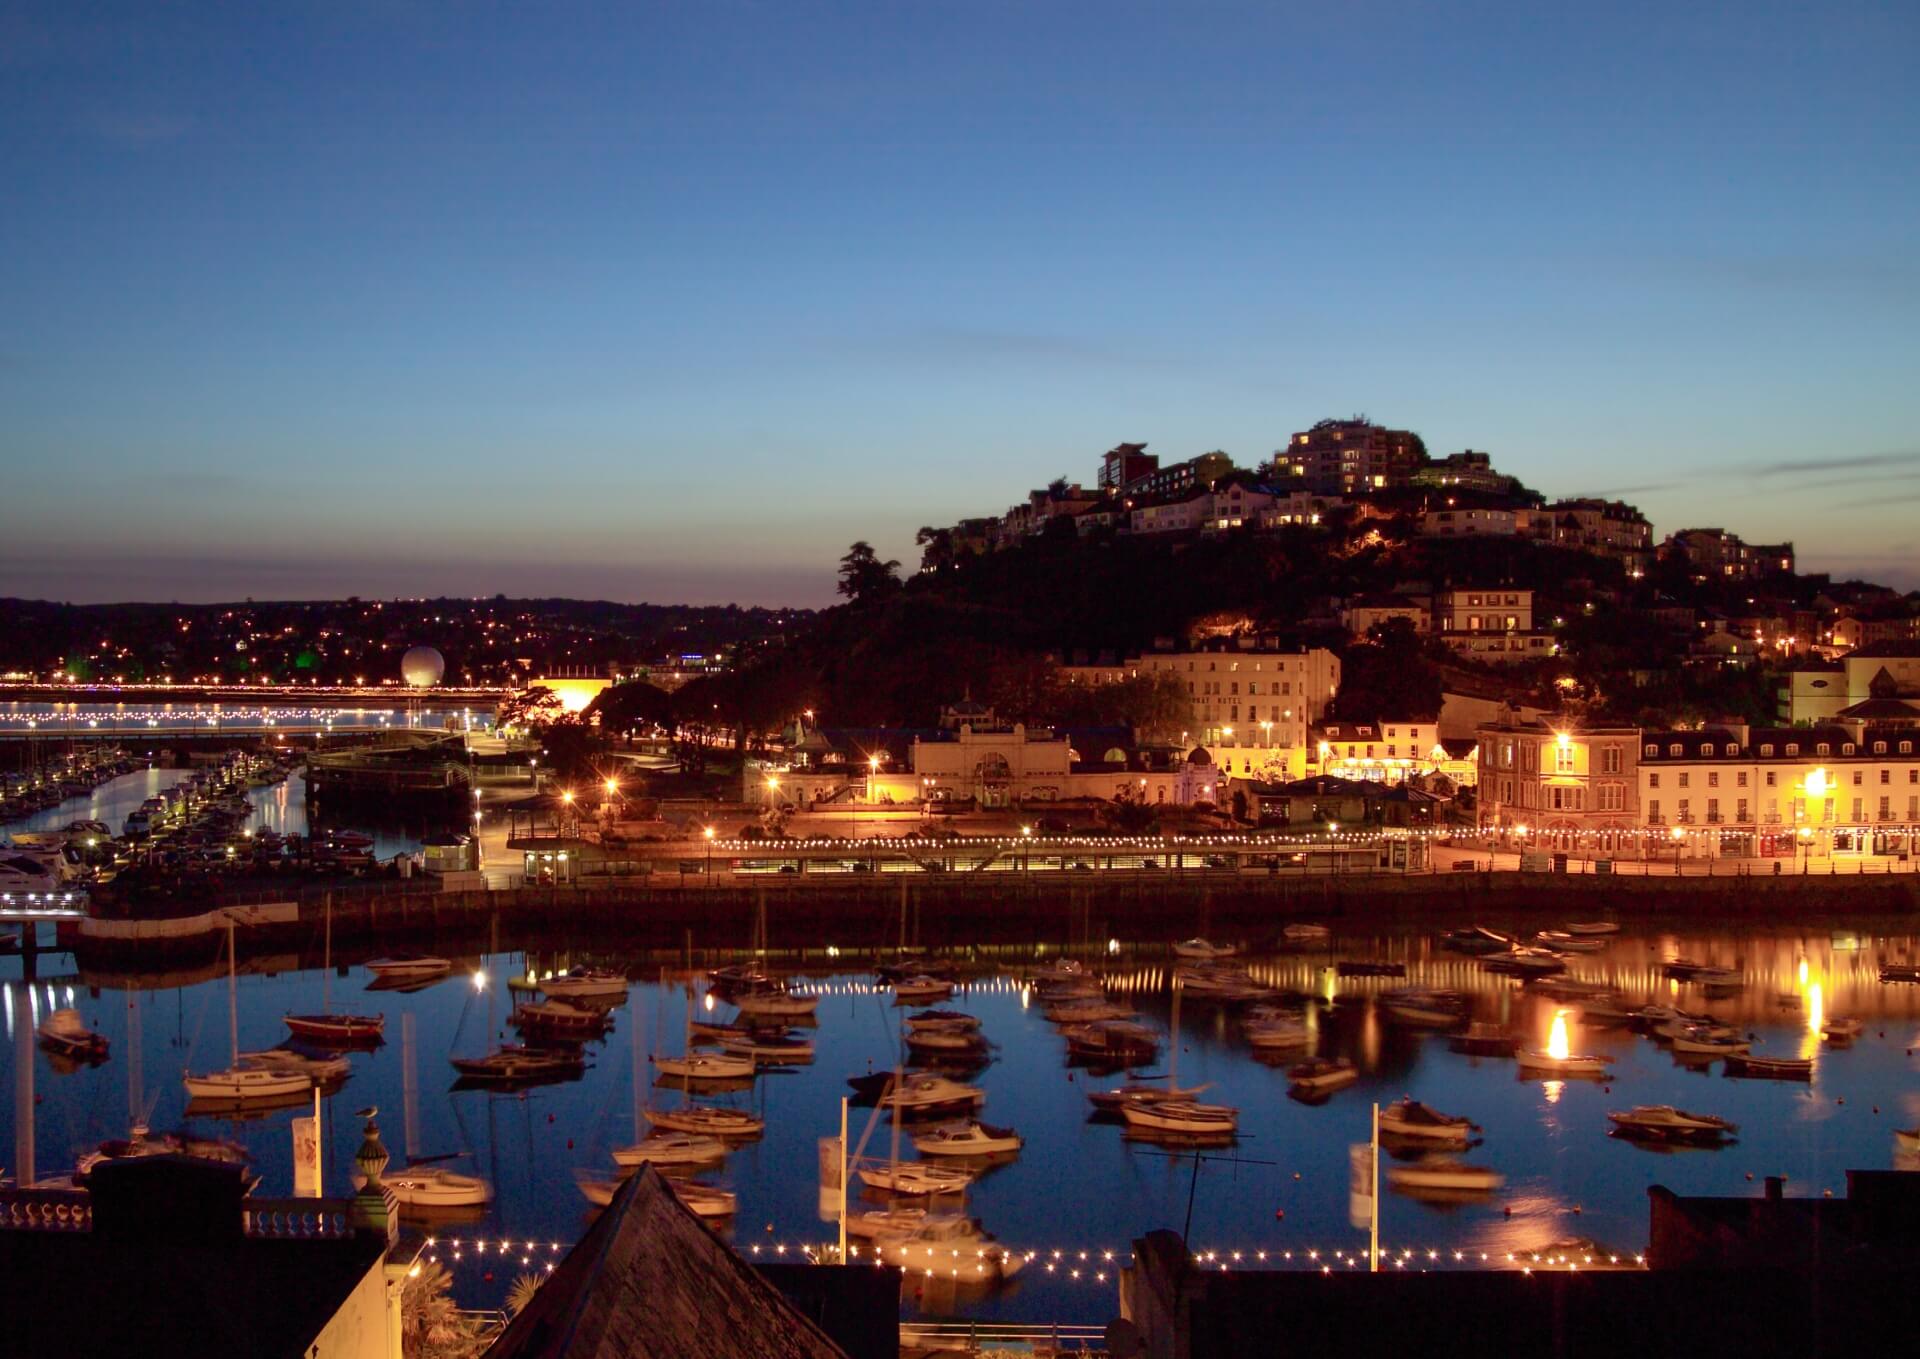 Luxury Self Catering Holiday Let in Torquay | Lisburne Place Luxury